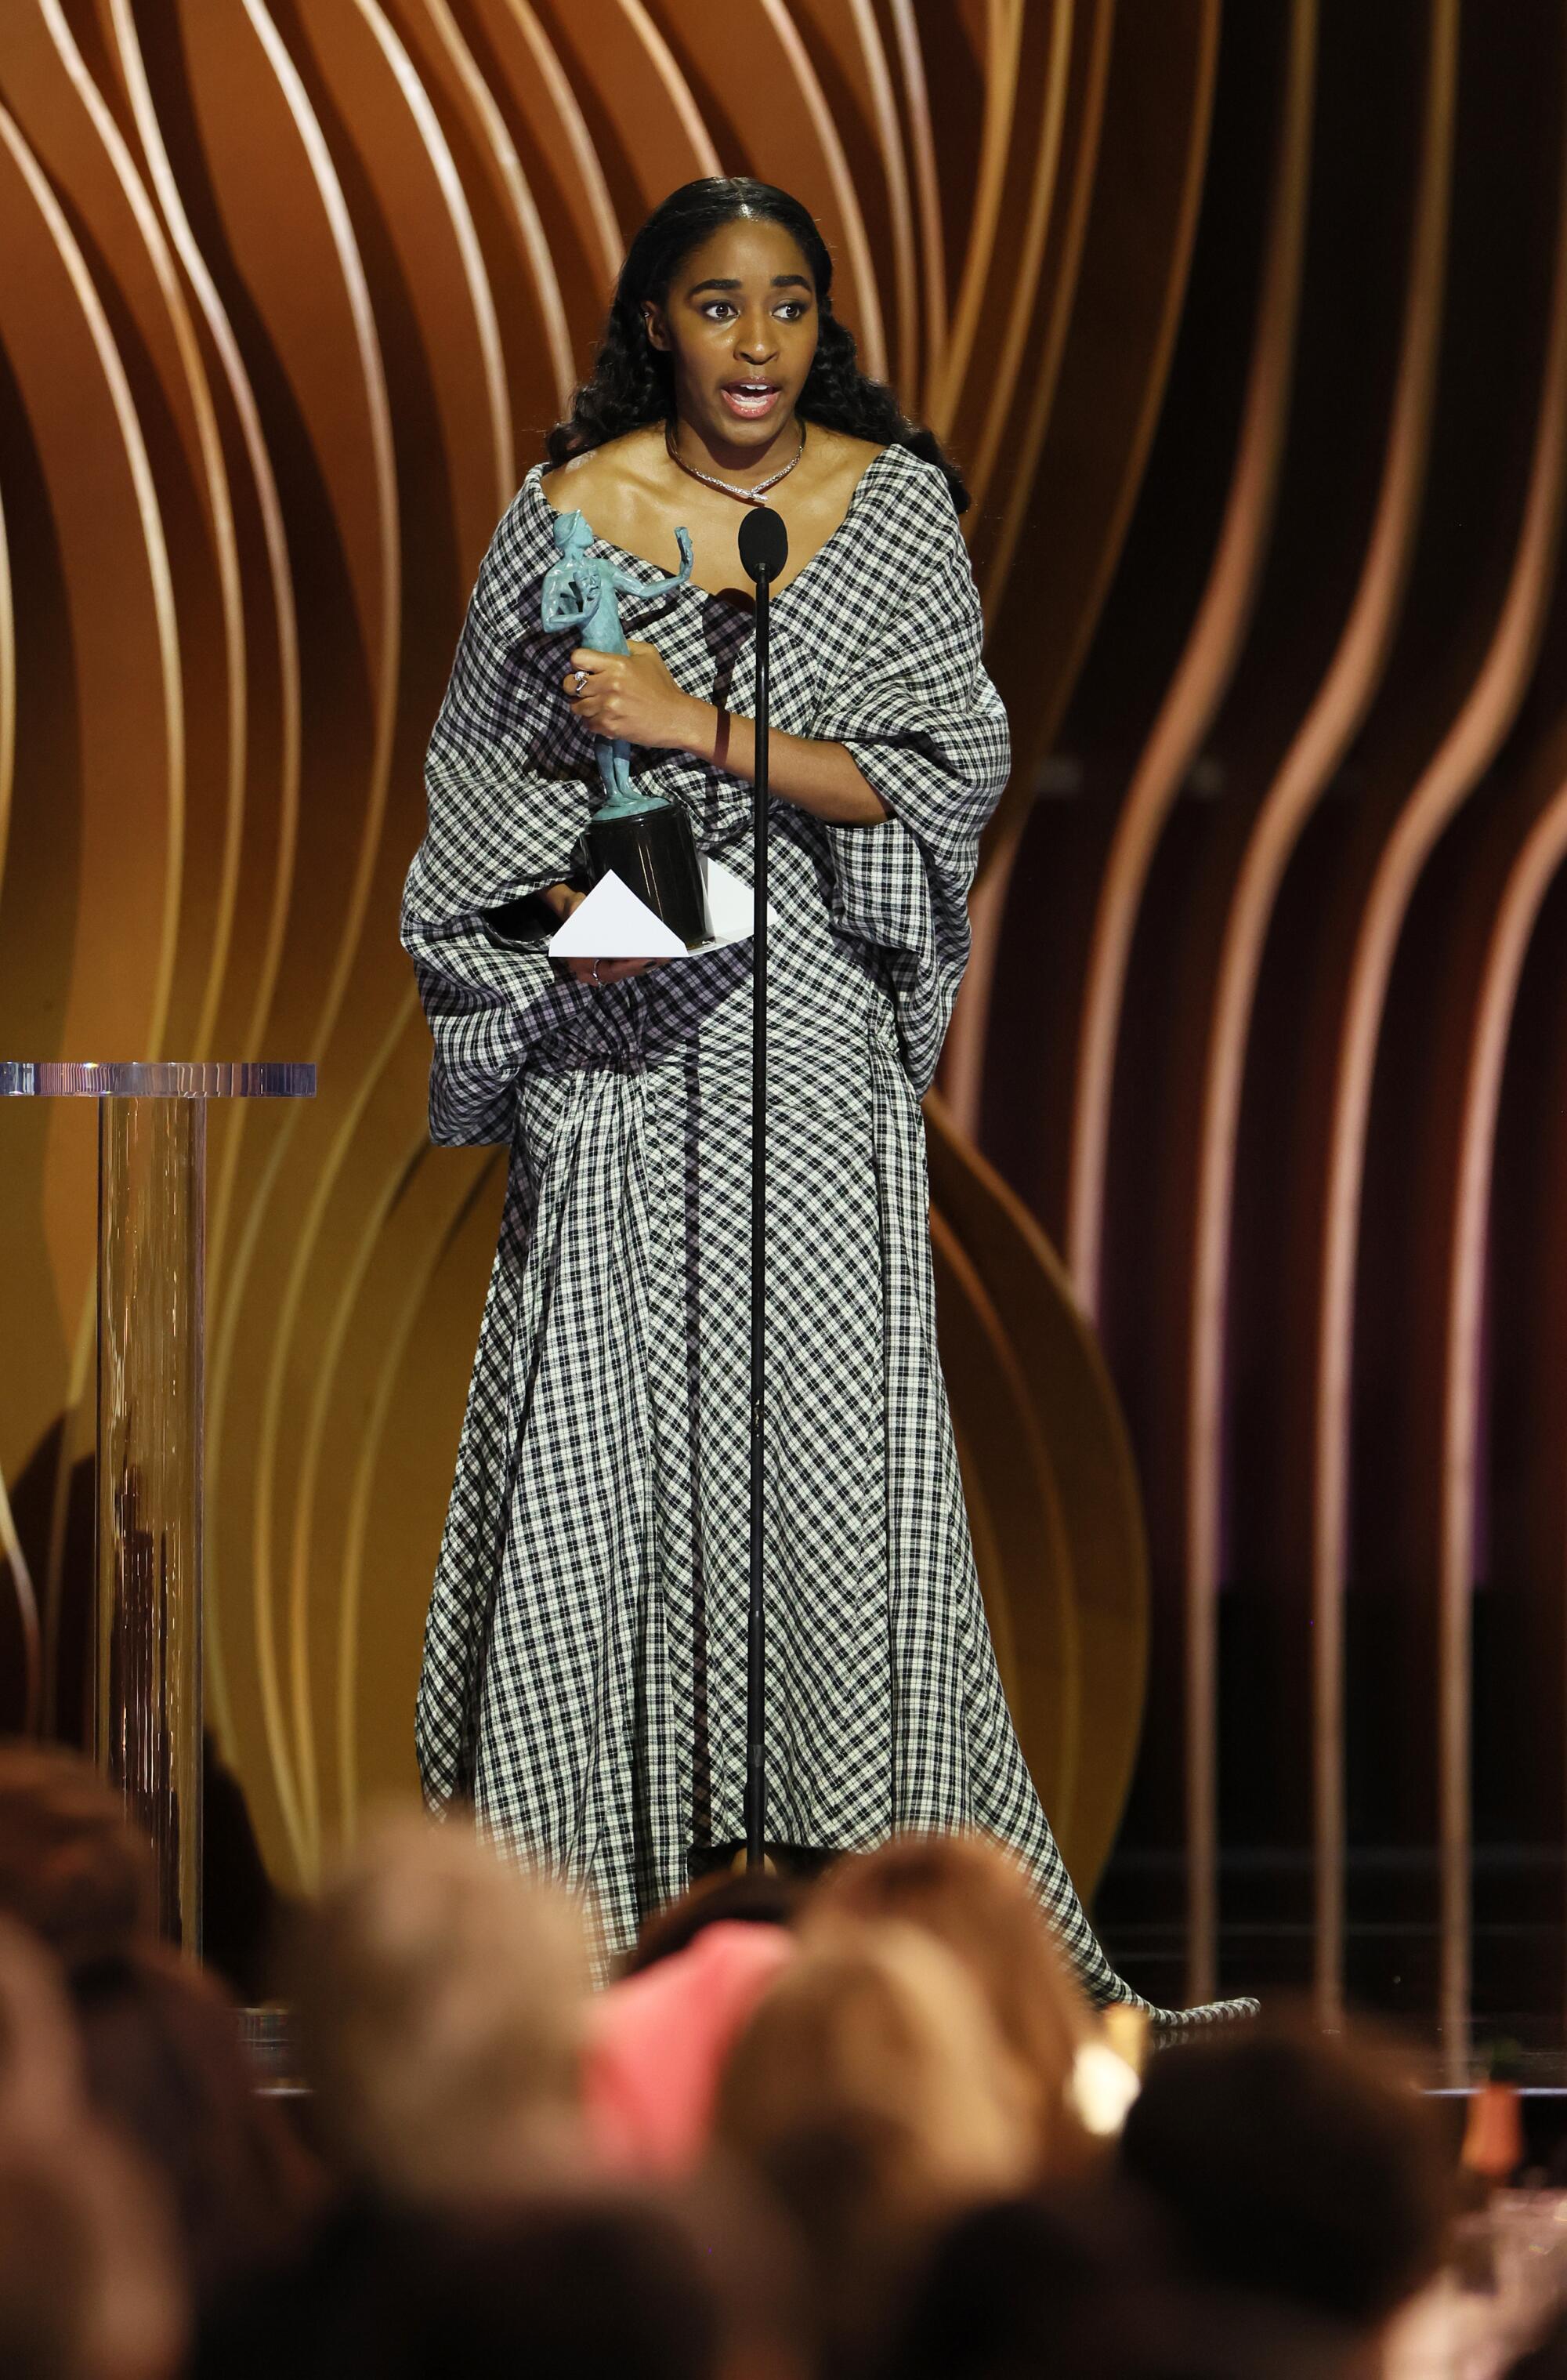 Ayo Edebiri wins the SAG Award for female actor in a comedy series.